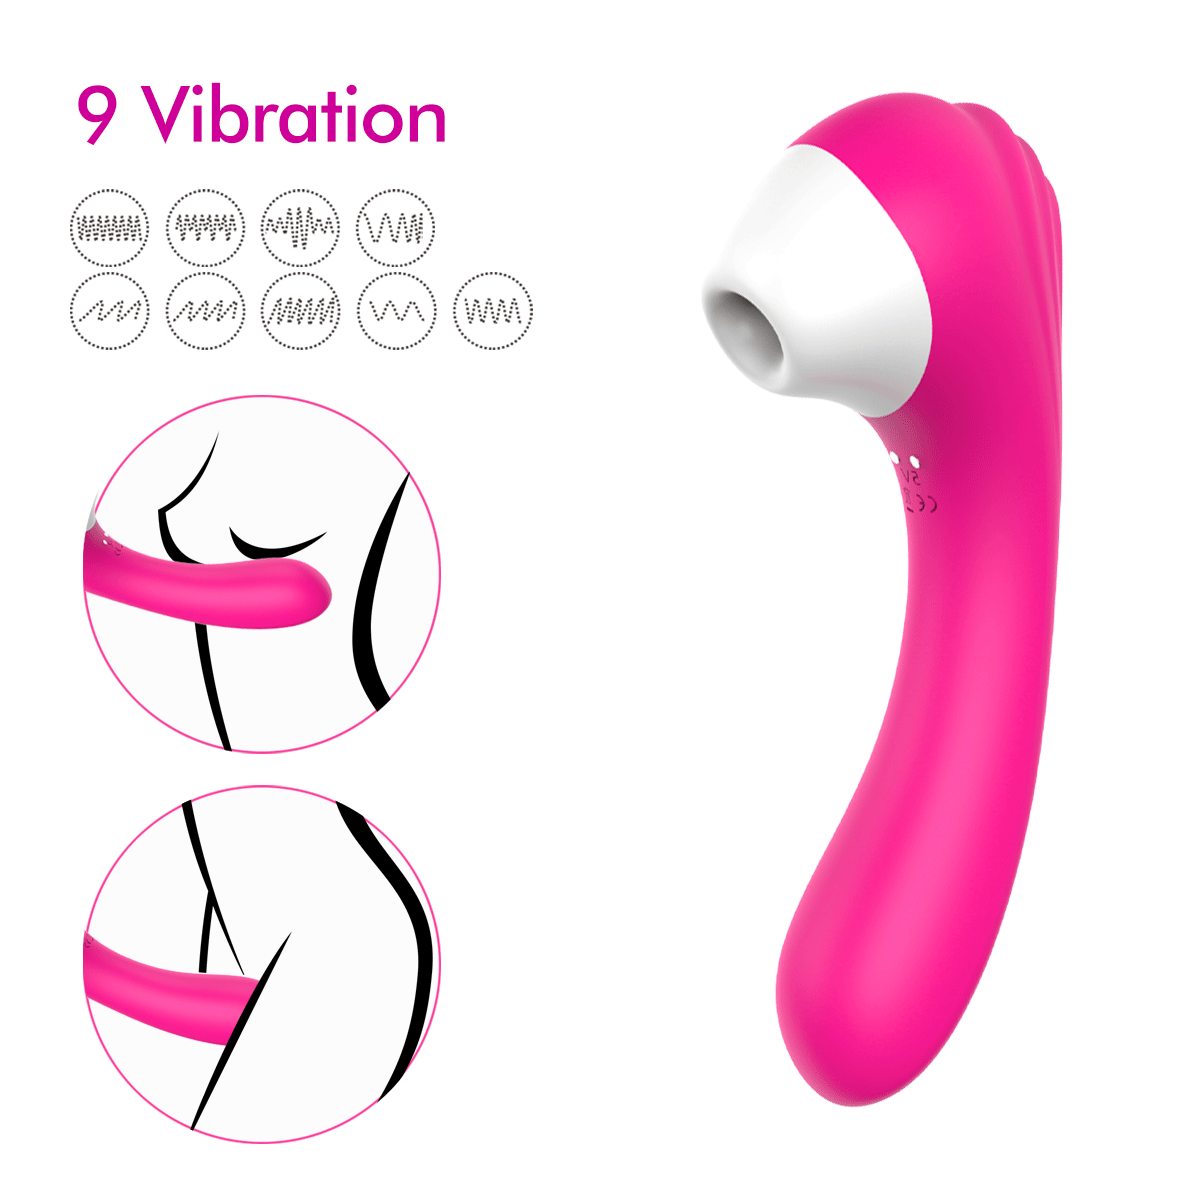 ToyWithMe - Sucking vibrator - Chill Out Sucking Vibrator - 10-20cm, 15-25cm, 25-35mm, Medical Grade Silicone, Non-Realistic, Pink, Purple, Rechargeable, Red, Sucking Vibrator, Vibrator, Waterproof, Women